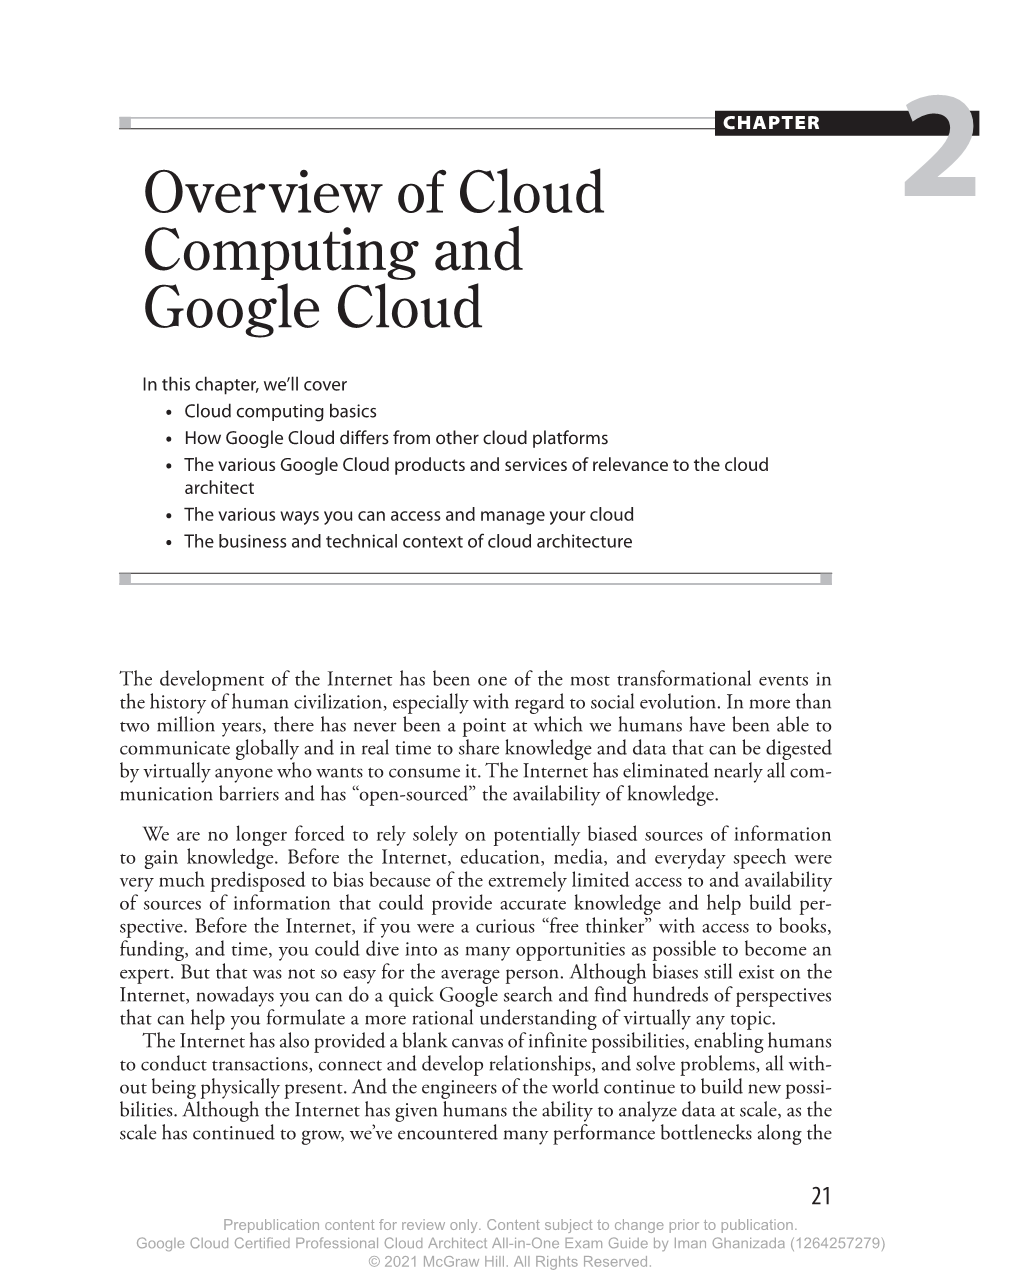 Overview of Cloud Computing and Google Cloud